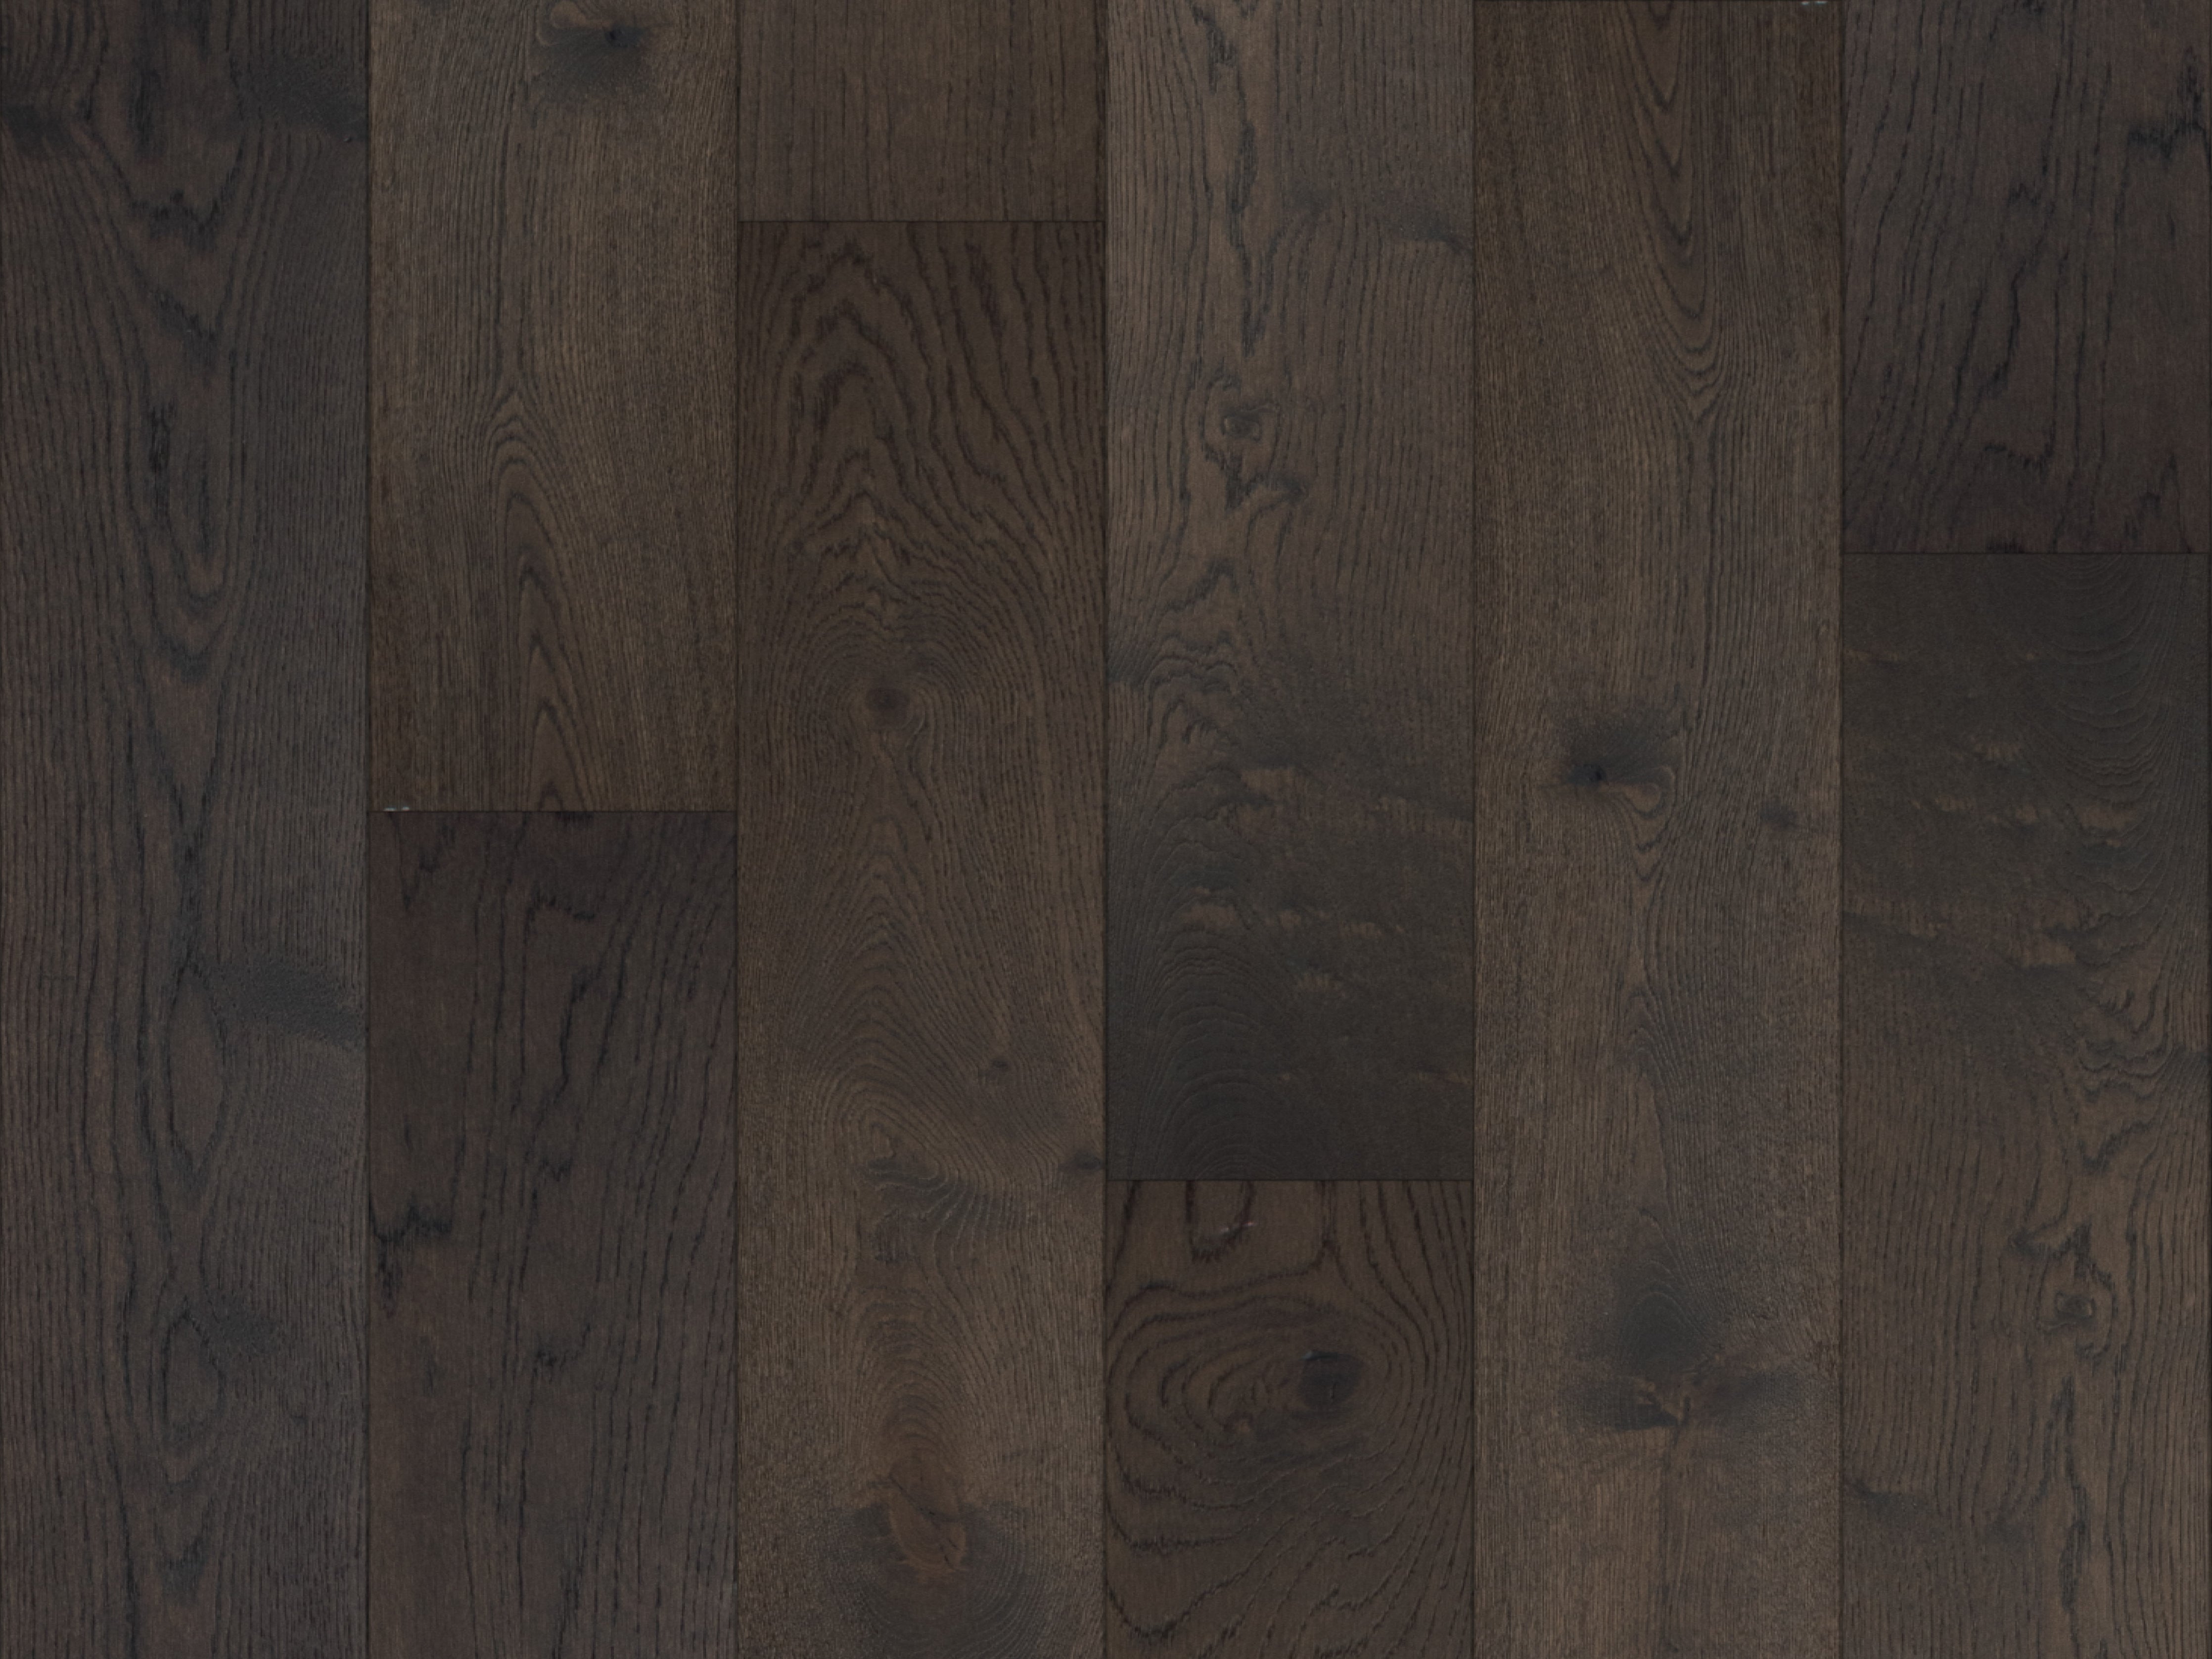 duchateau the guild lineage ashley european oak engineered hardnatural wood floor uv lacquer finish for interior use distributed by surface group international